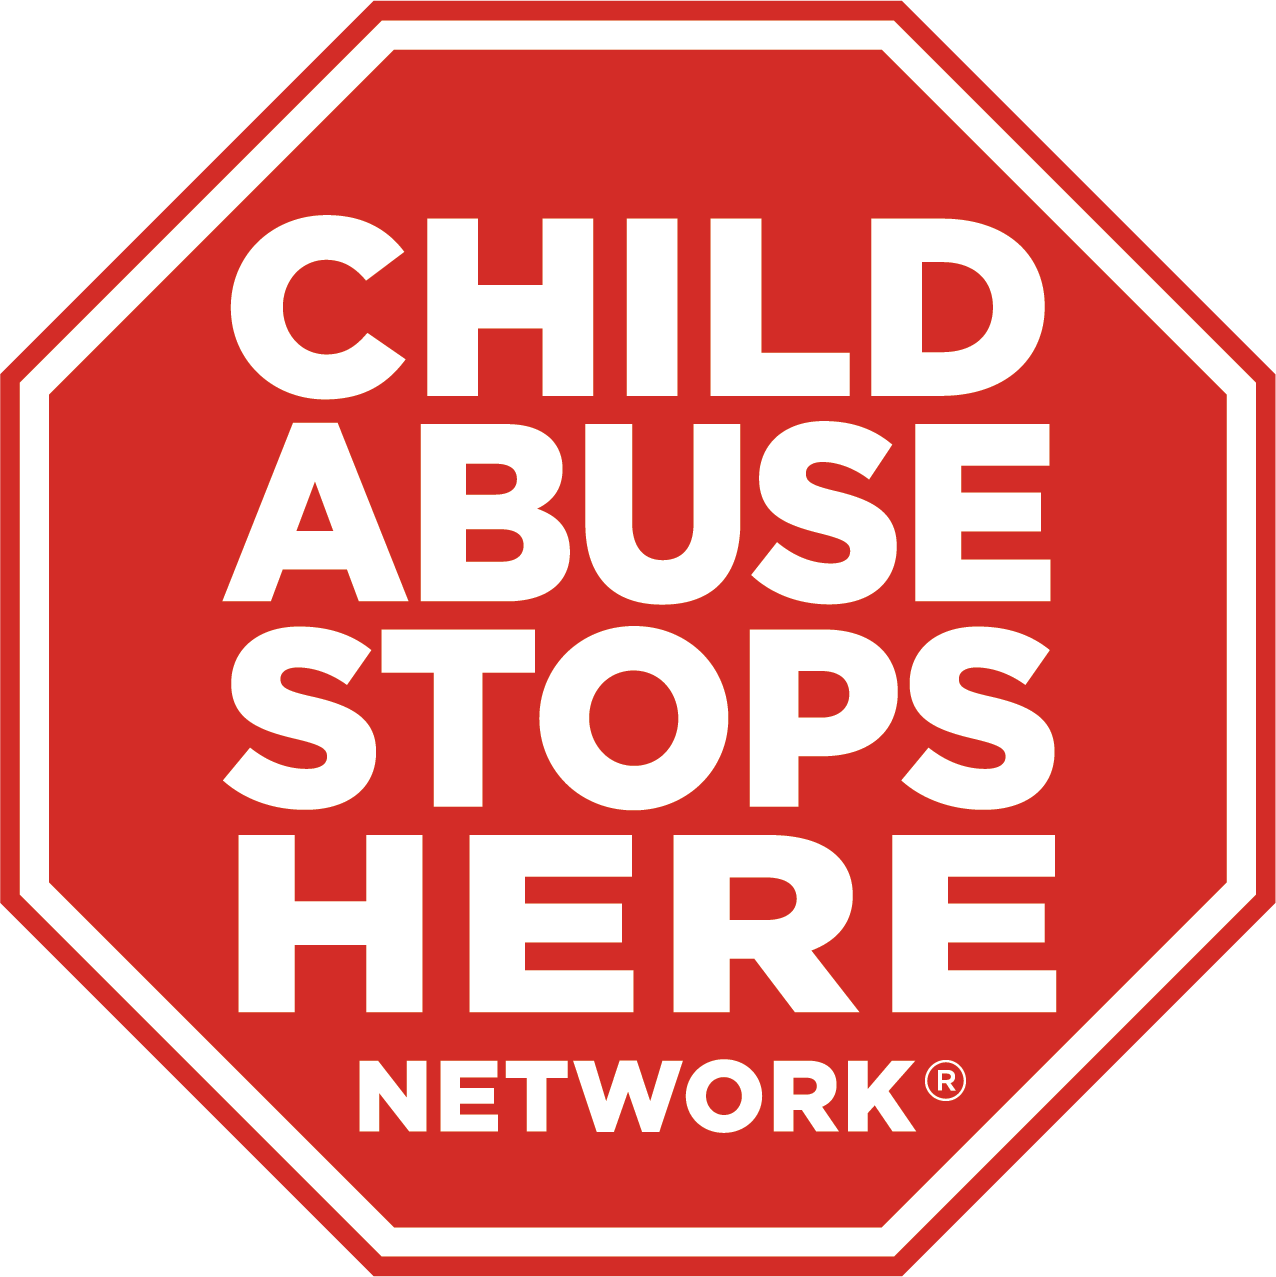 Child Abuse Stops Here Network